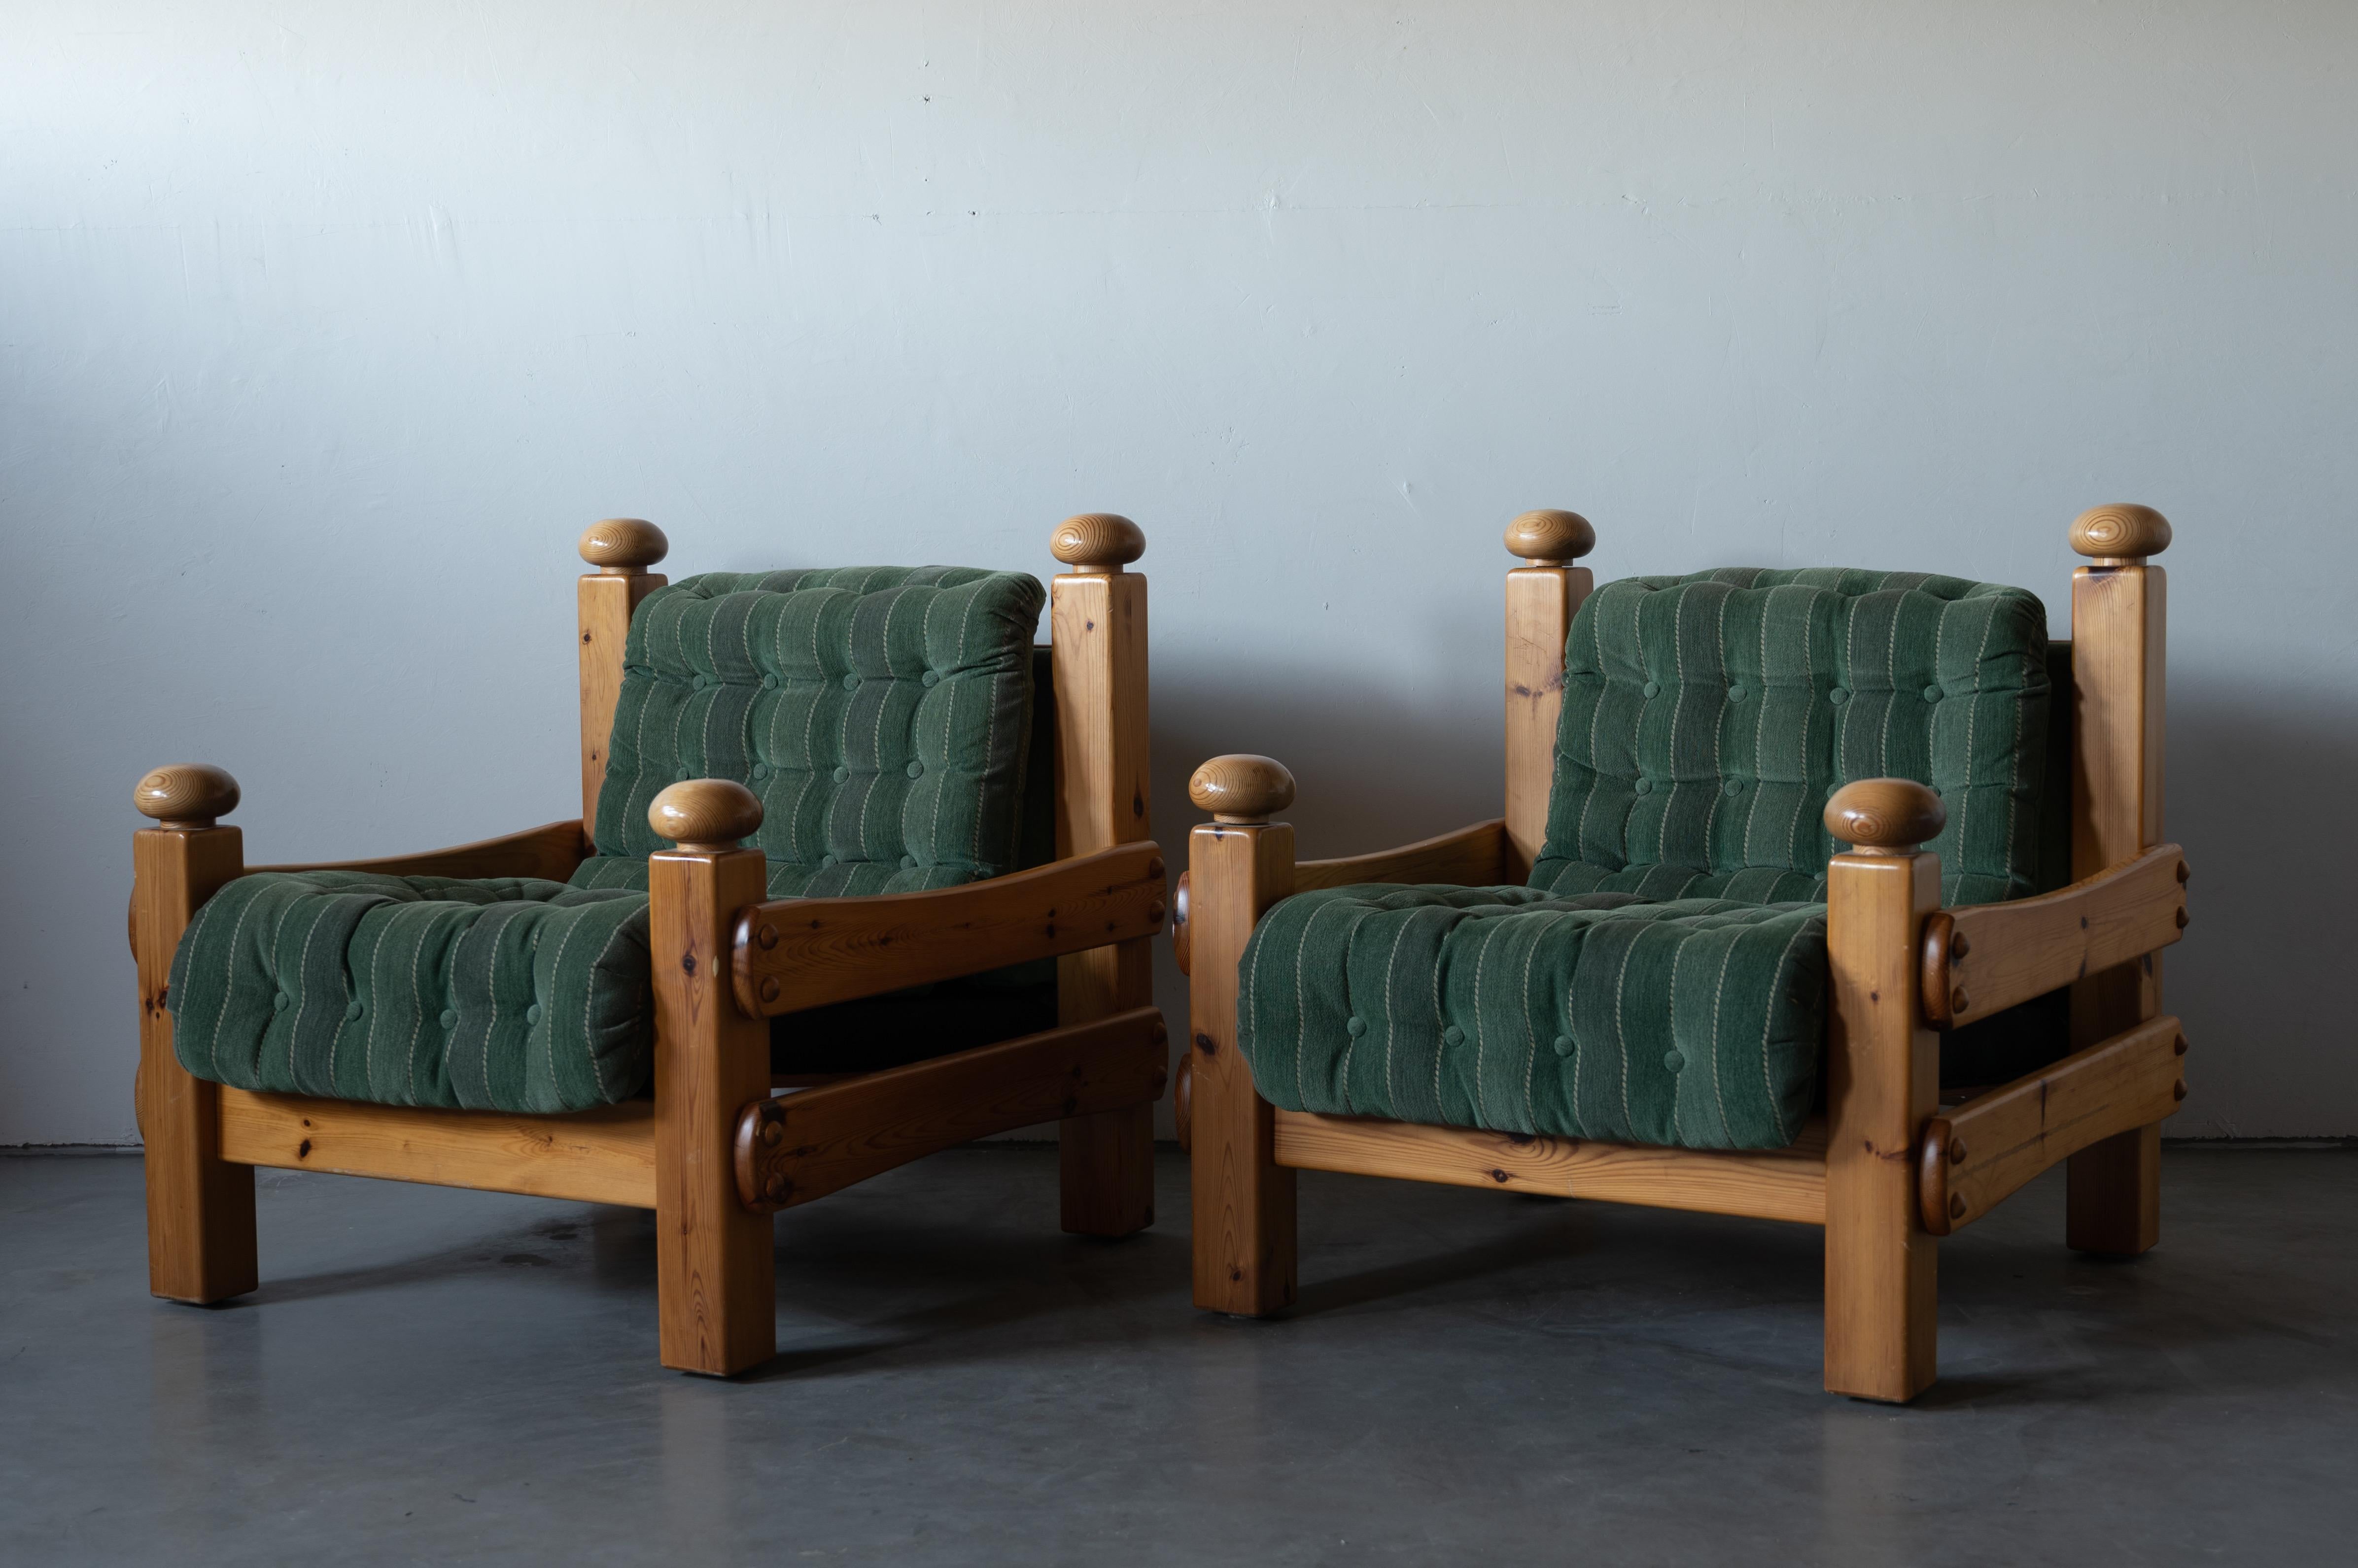 A pair of lounge chairs. Designed and produced in Sweden, 1970s. Cushions upholstered in green fabric and fitted with buttons.

Other designers of the period include Pierre Chapo, Axel Einar Hjorth, Charlotte Perriand, and George Nakashima.